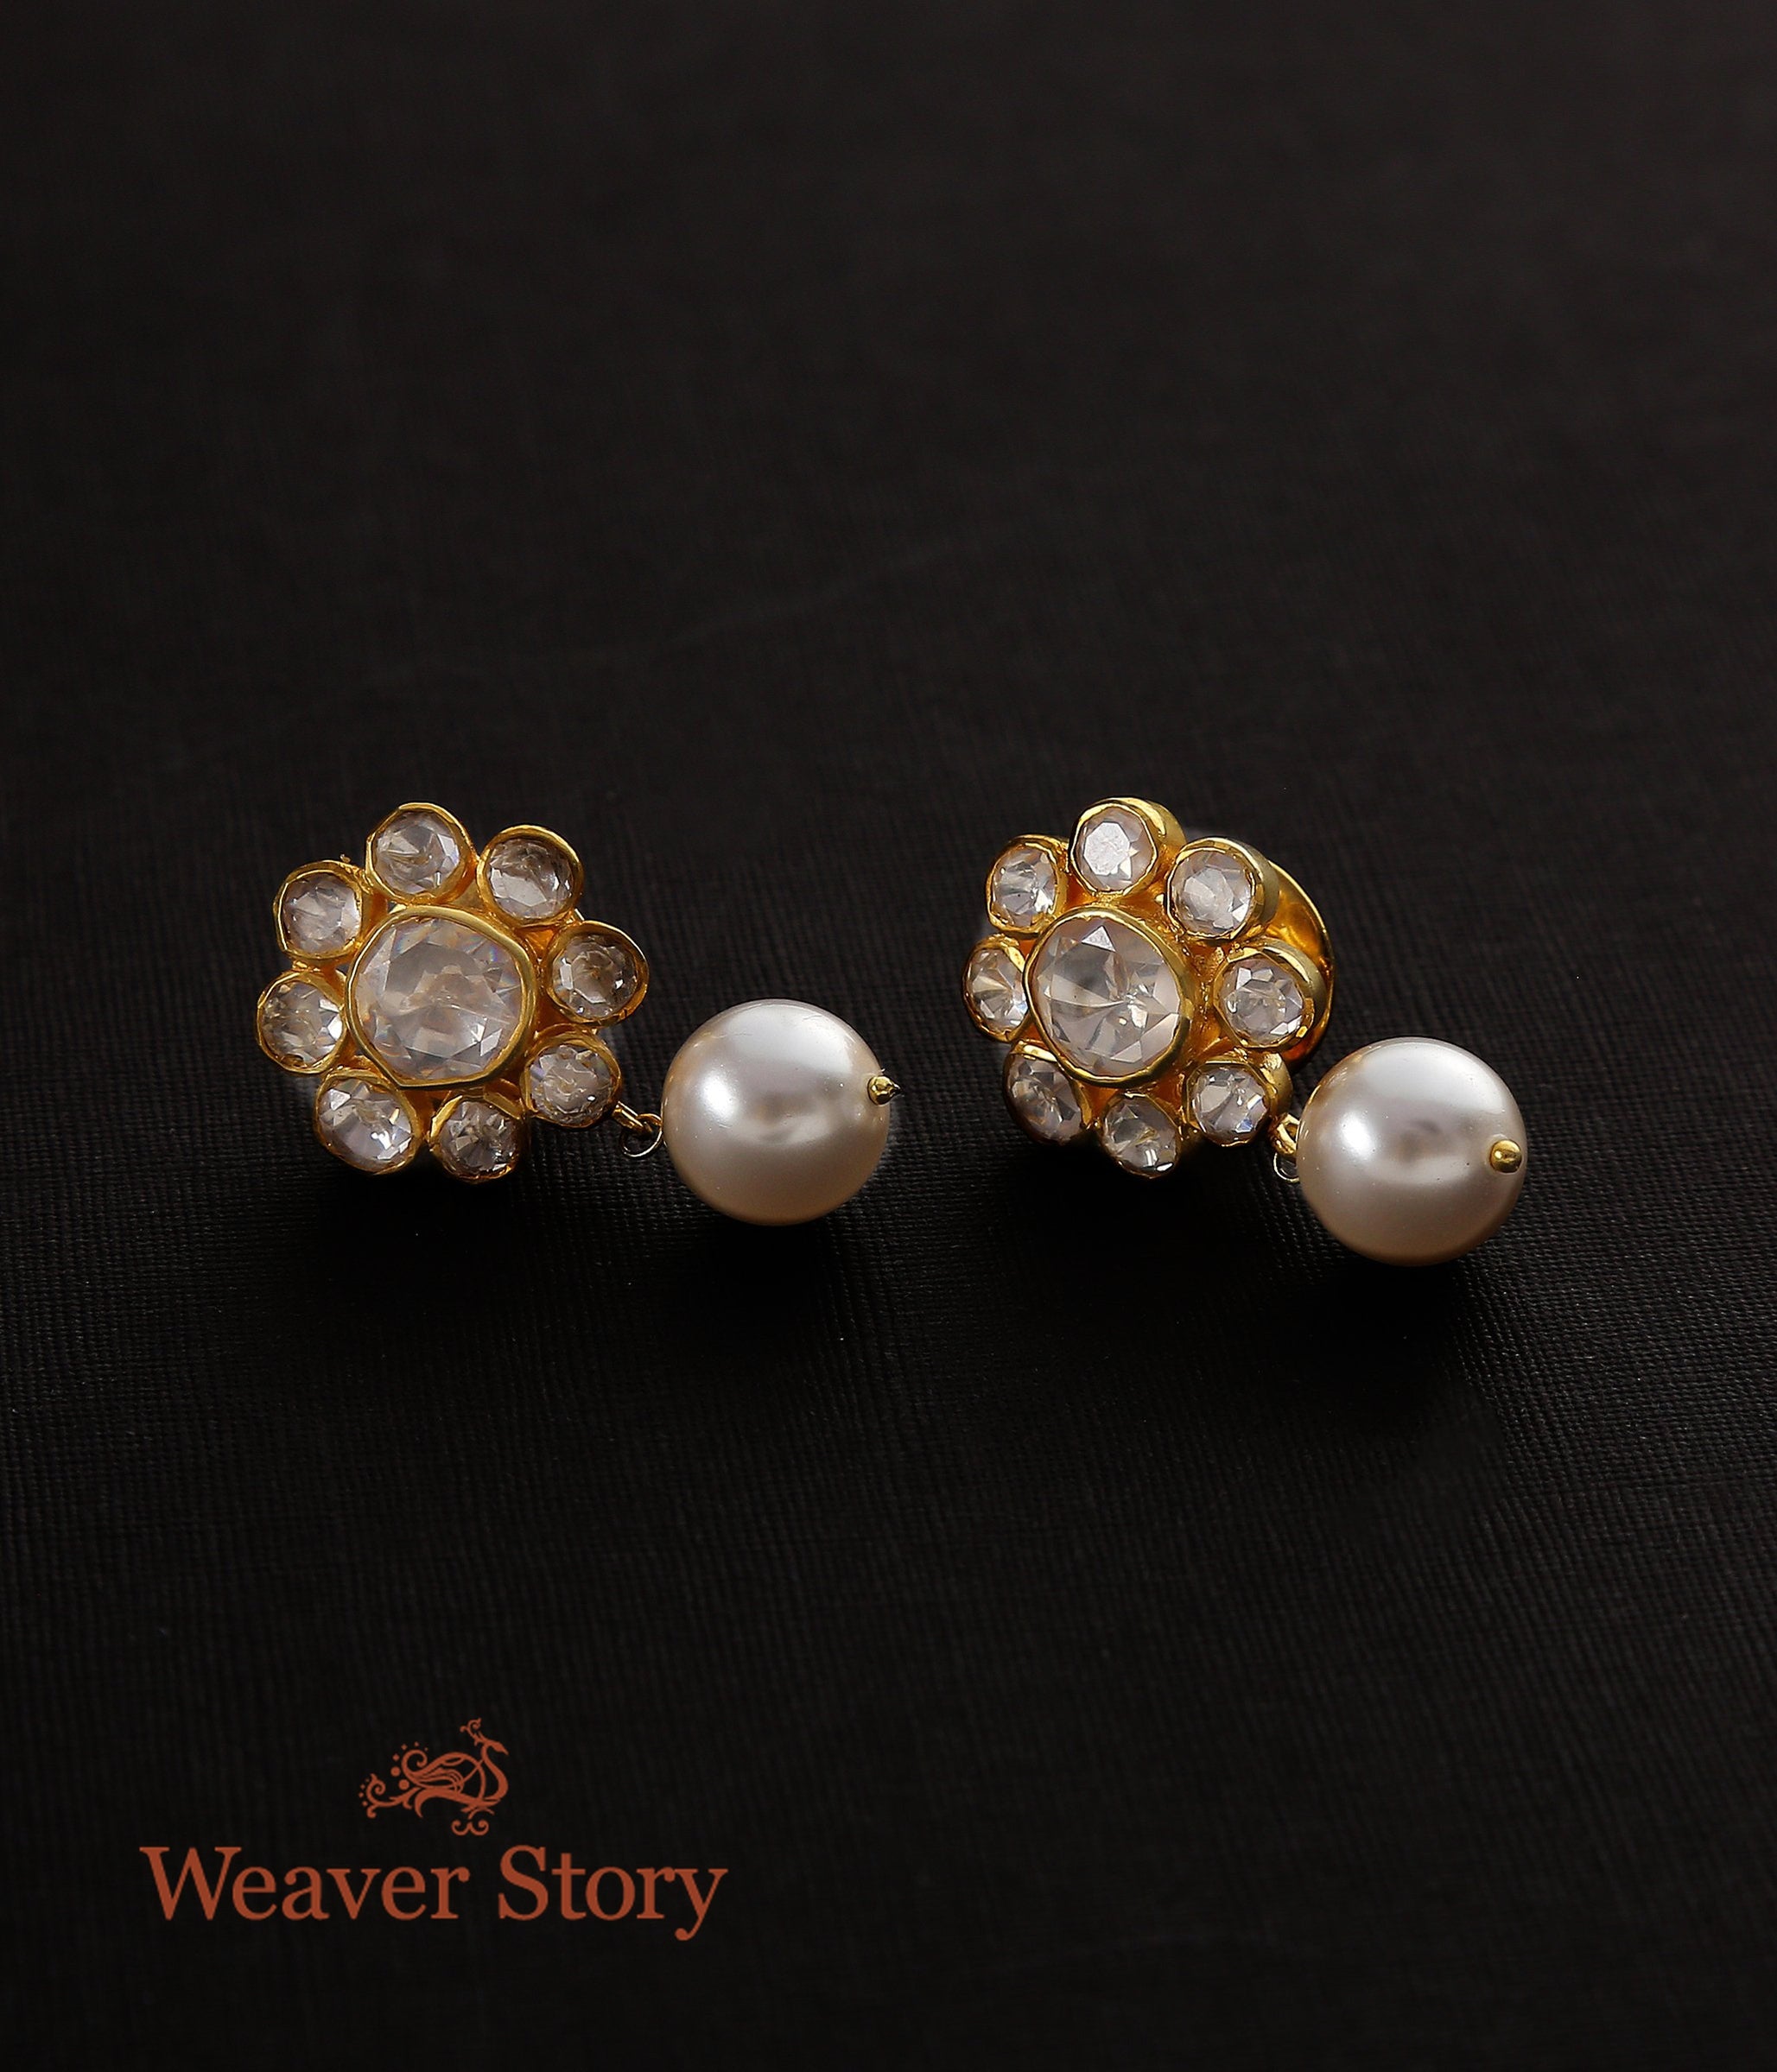 Phoolbaag_Earrings_with_Moissanite_Polki_and_Pearls_Crafted_in_Pure_Silver_WeaverStory_02